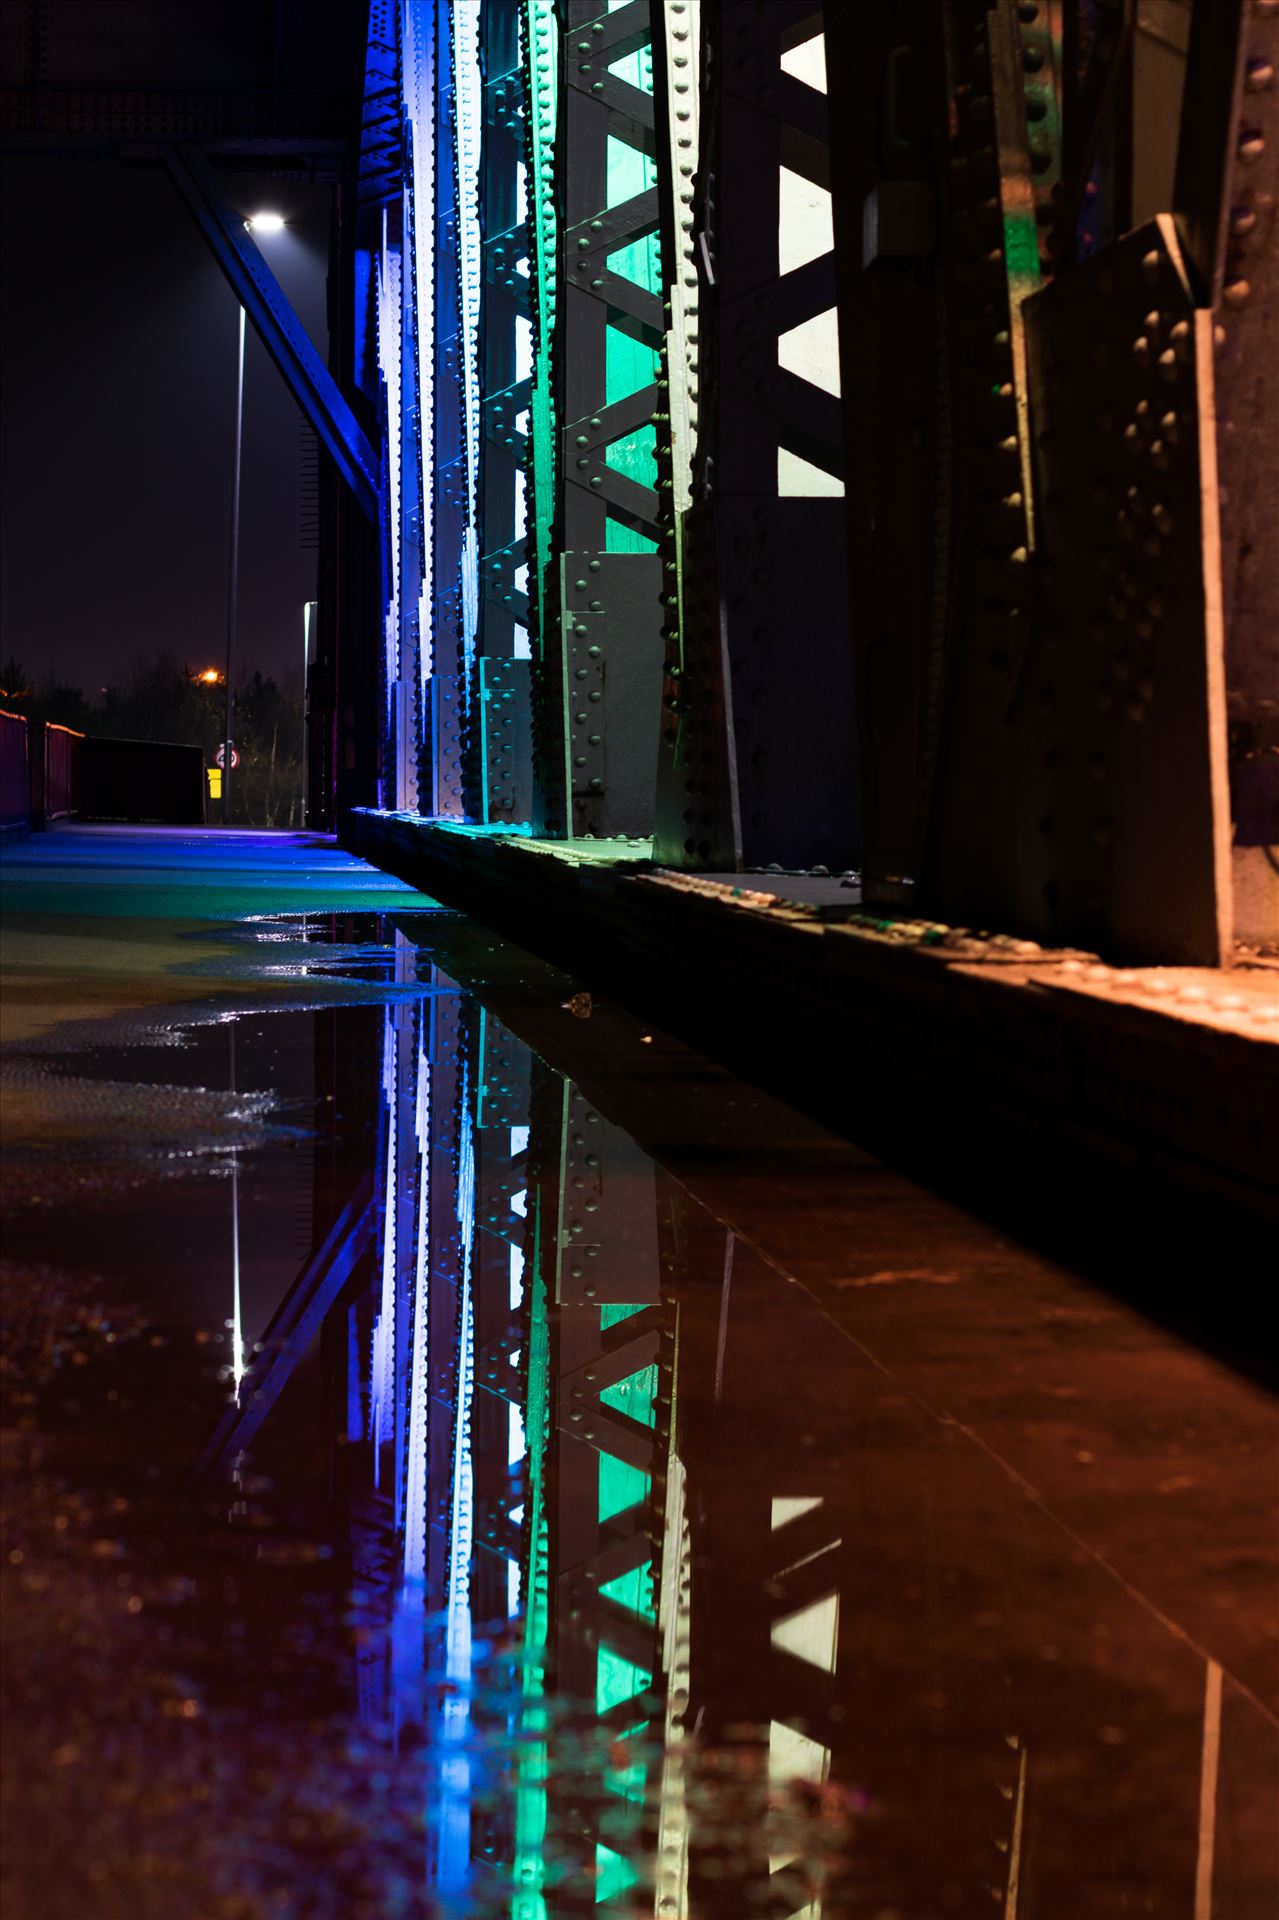 Newport Bridge Rainbow Lights Puddle Refrlection - A photo of the lights on Newport Bridge and a puddle reflection. by AJ Stoves Photography